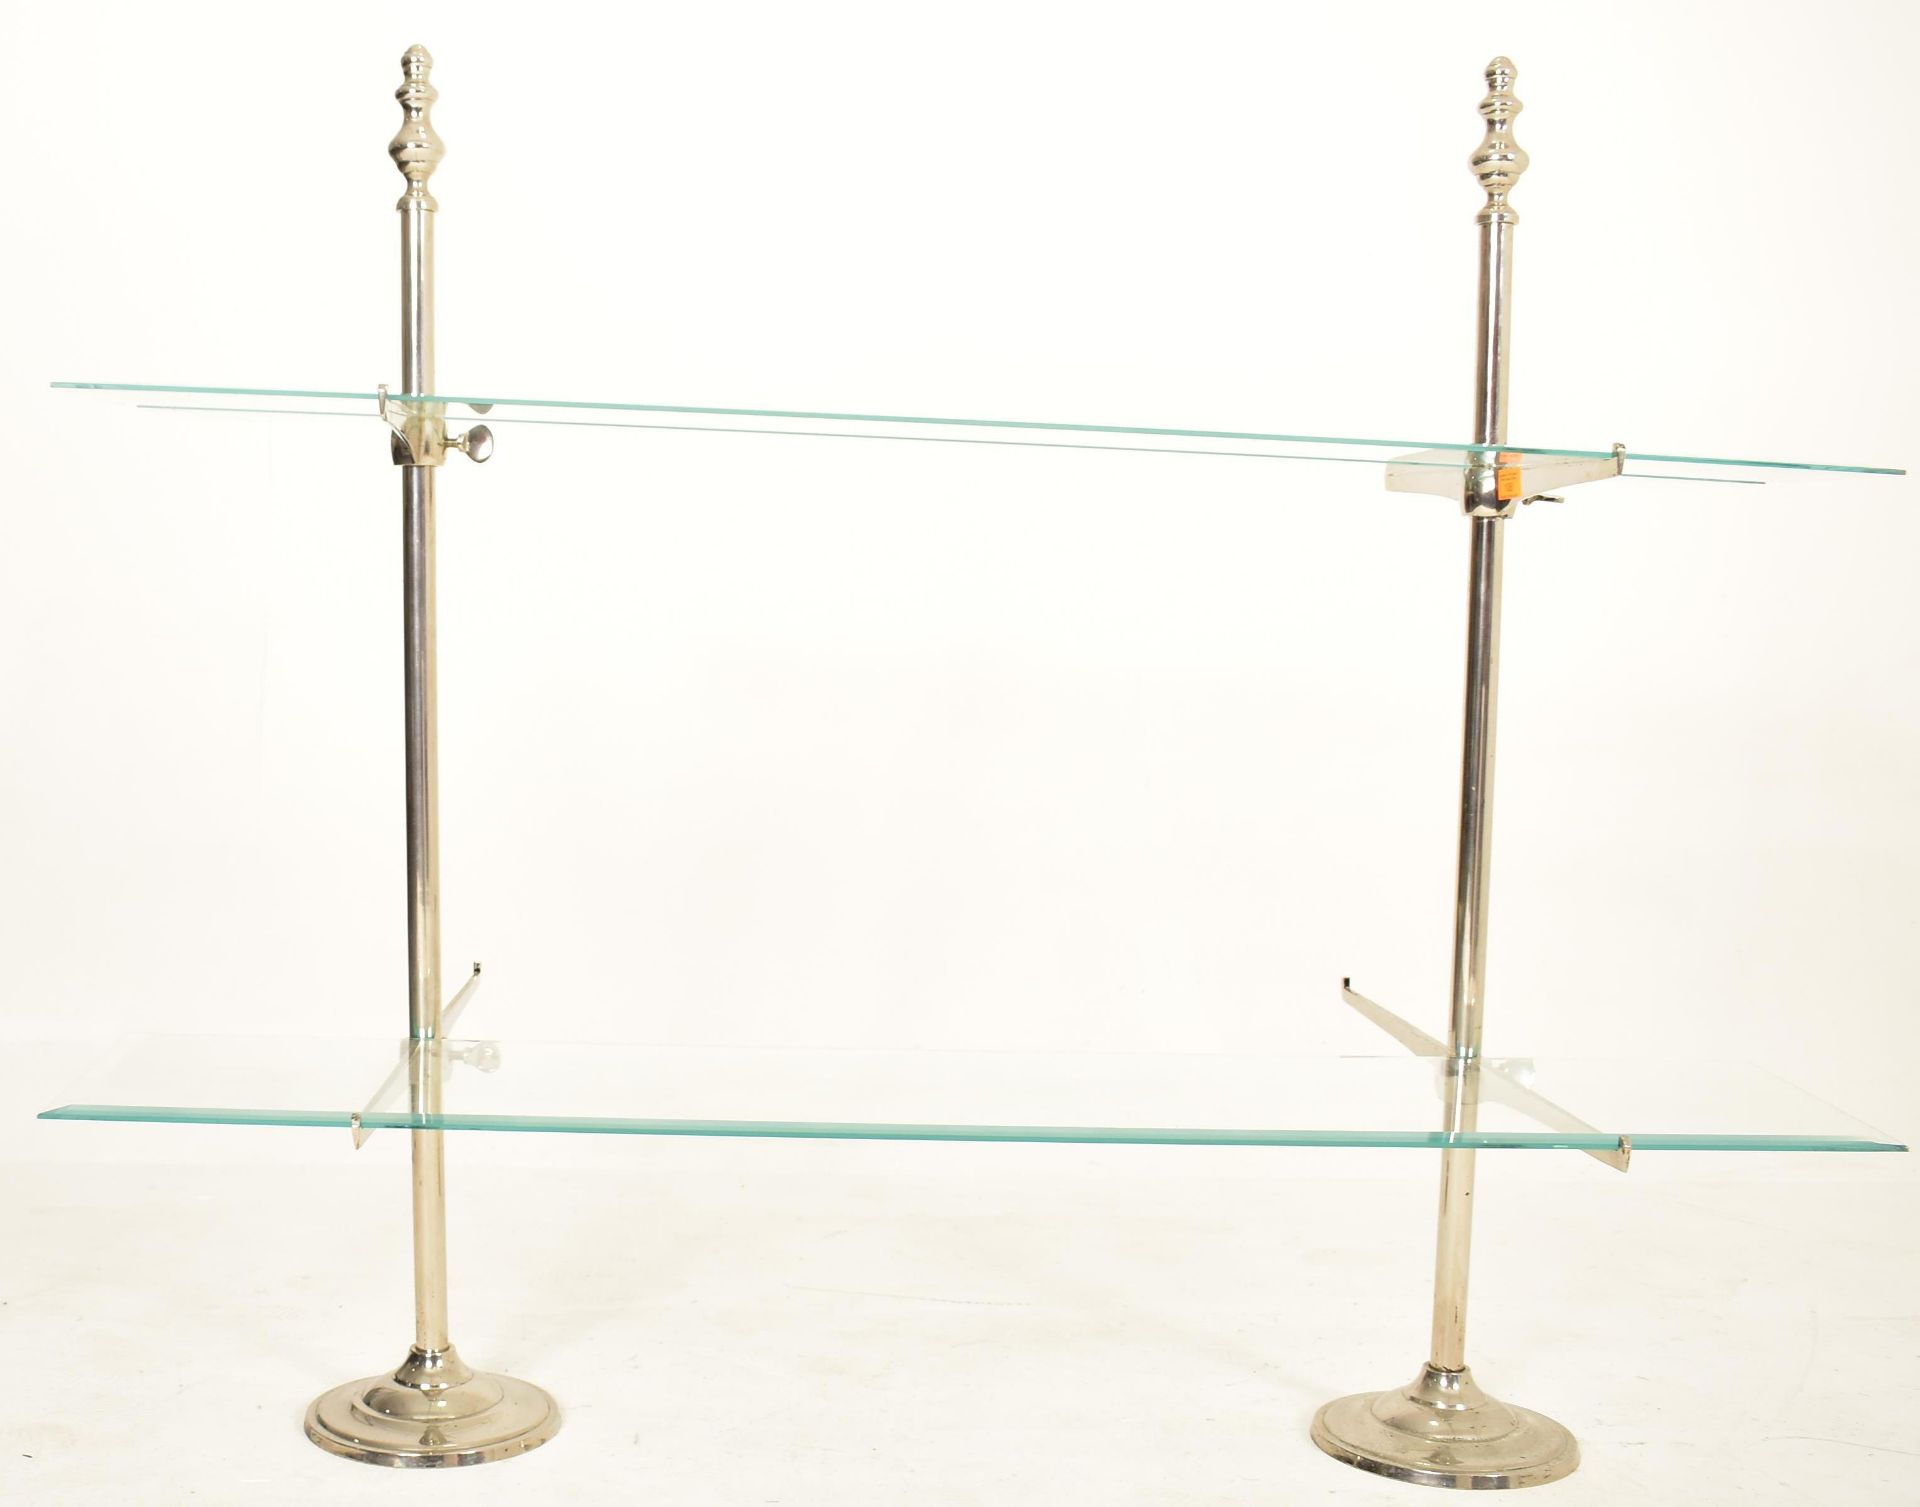 ART DECO CHROME AND GLASS SHOP DISPLAY STAND - Image 2 of 7